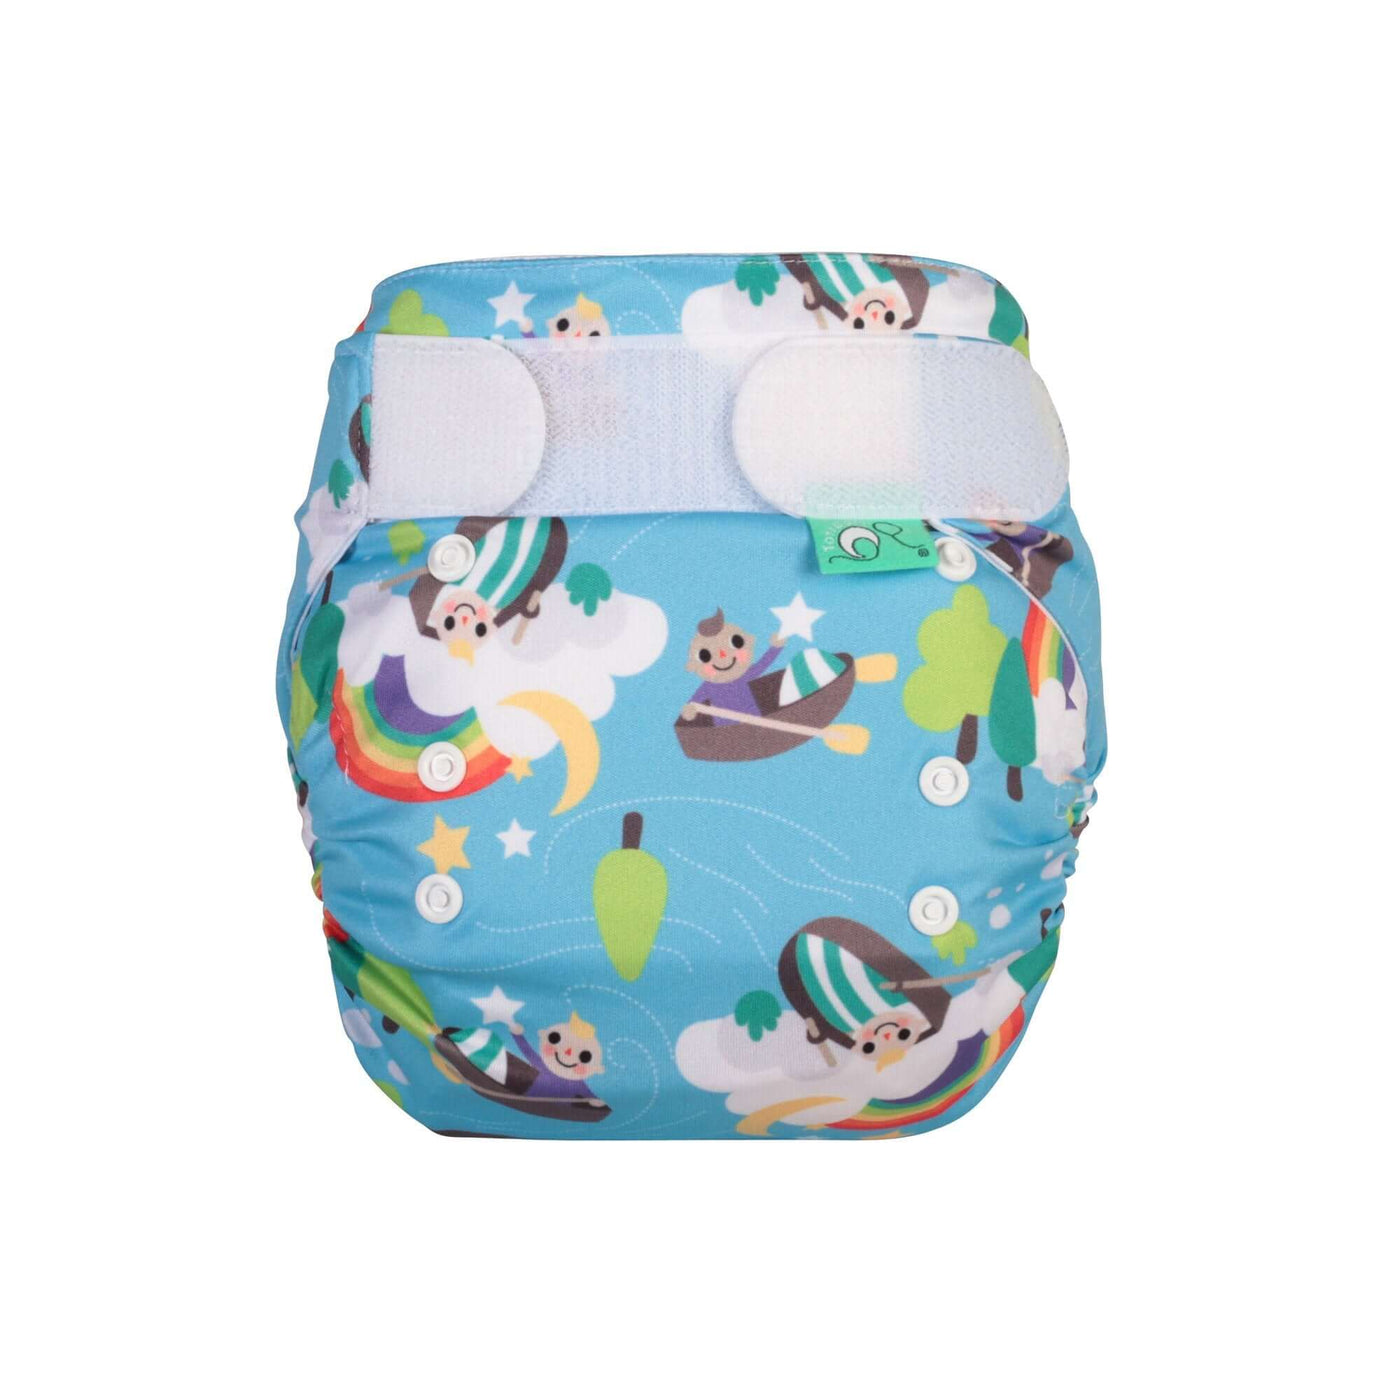 Tots Bots EasyFit Star Nappy All-in-one Colour: Row Your Boat reusable nappies Earthlets